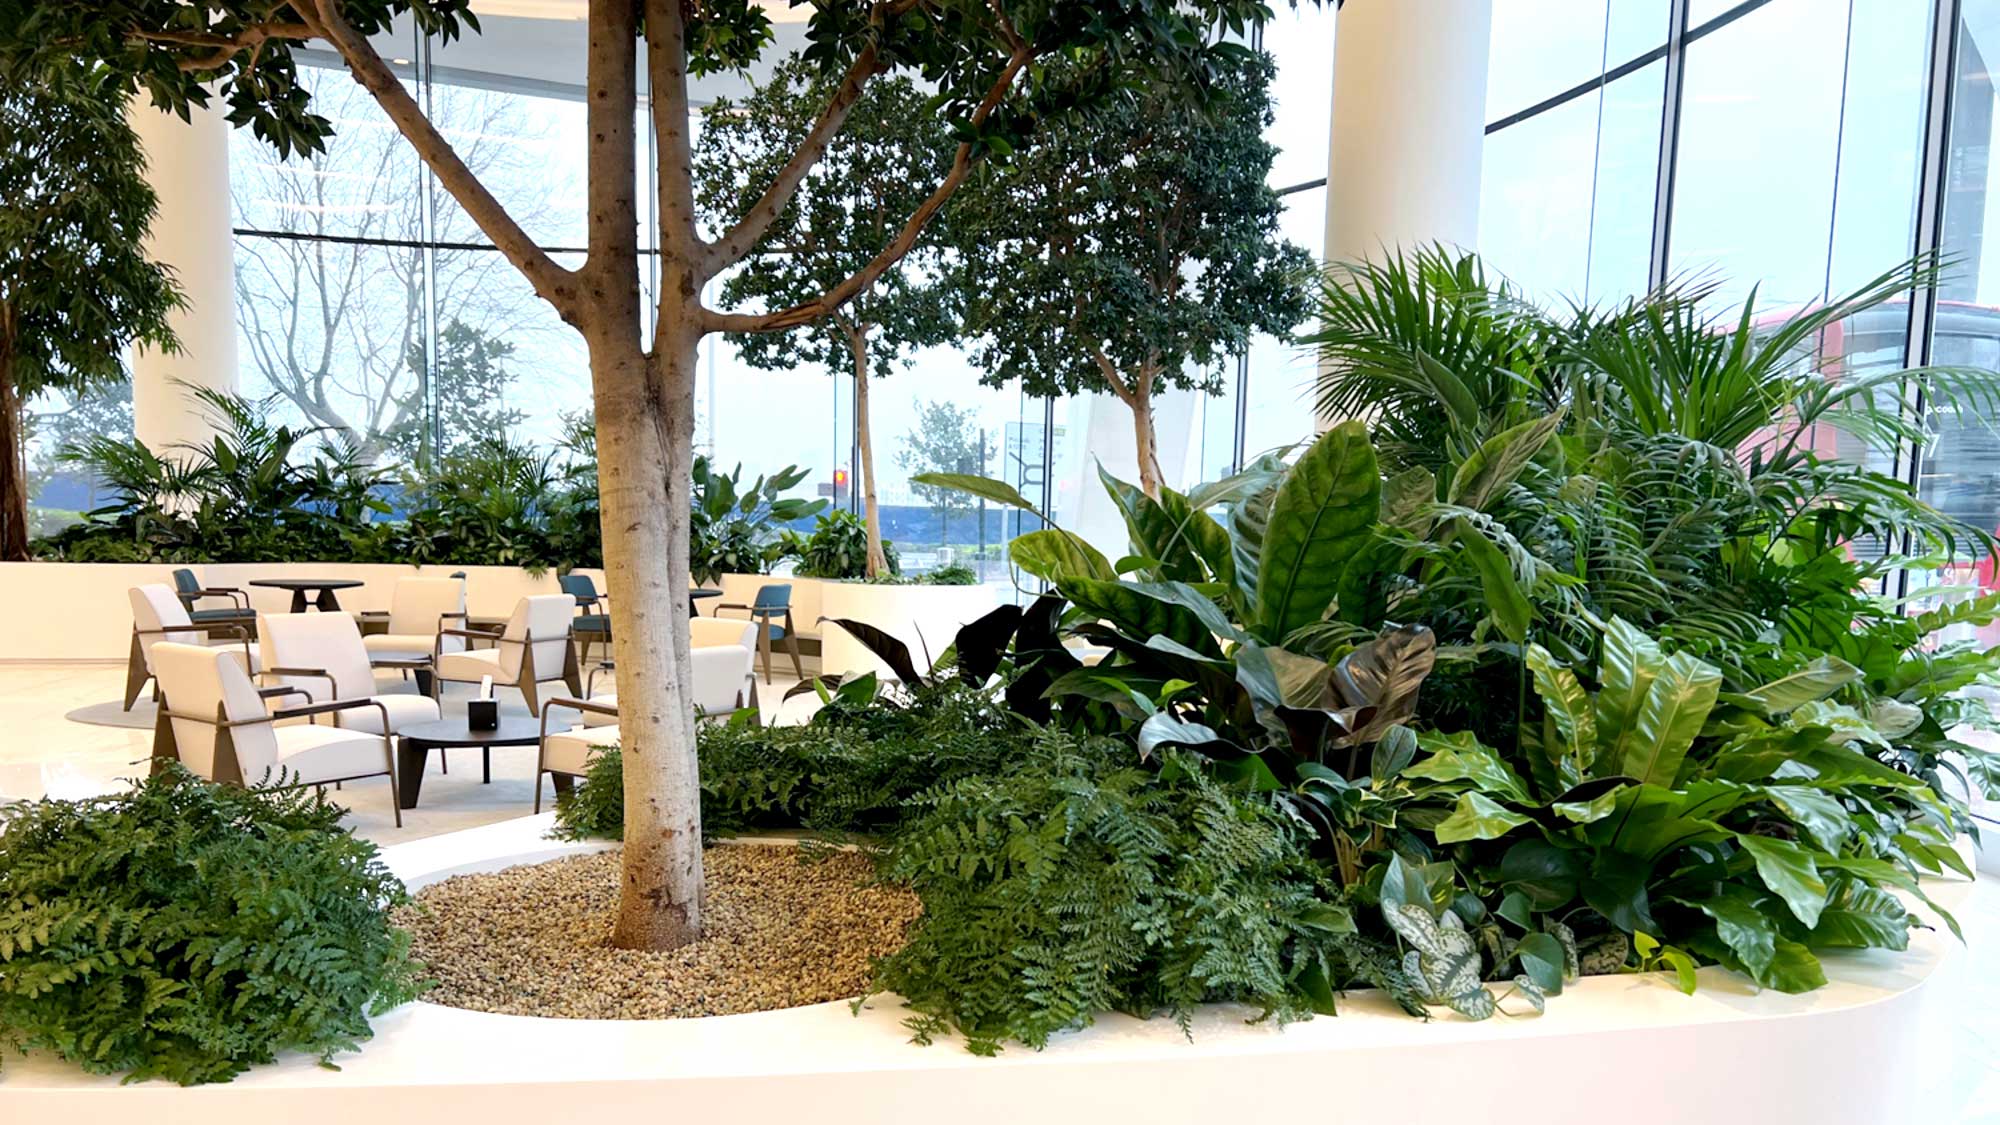 Lush green plants and a tree indoors